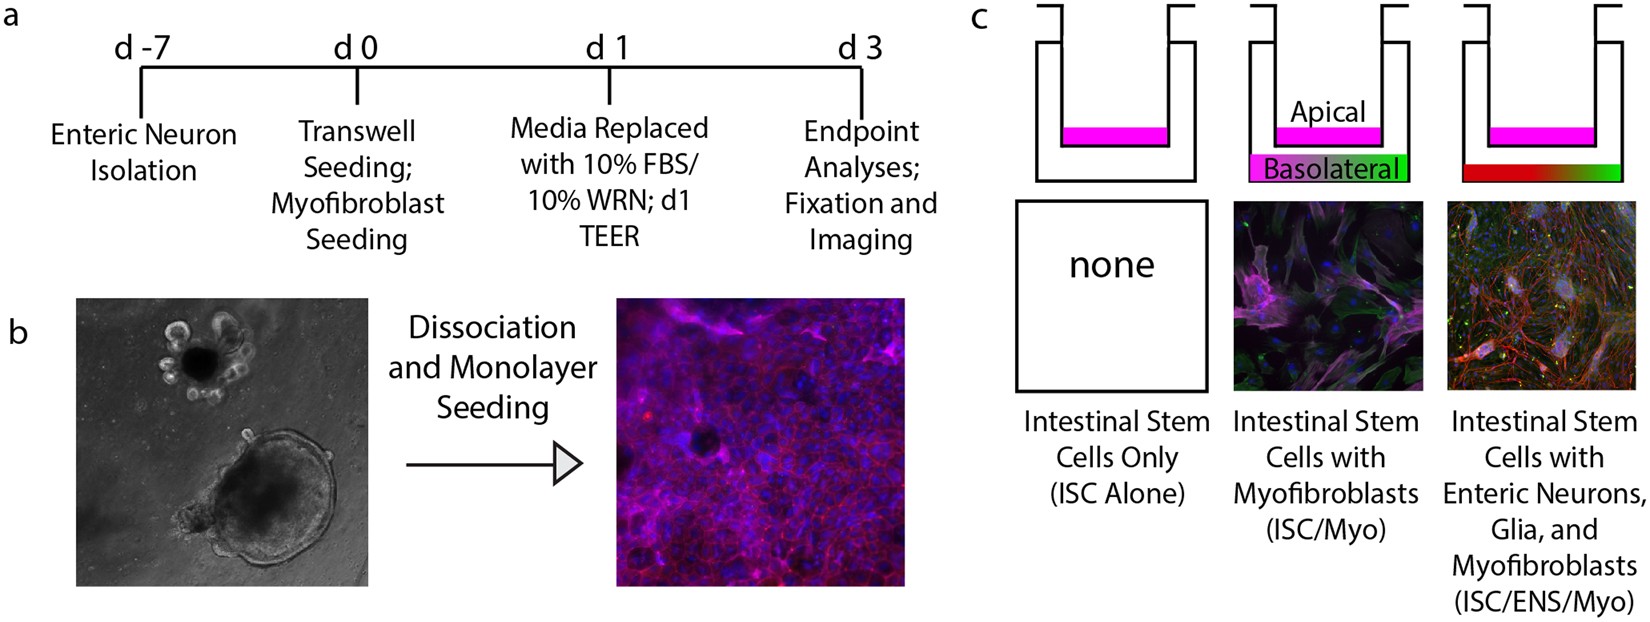 Enteric Nervous System Regulation of Intestinal Stem Cell Differentiation  and Epithelial Monolayer Function | Scientific Reports